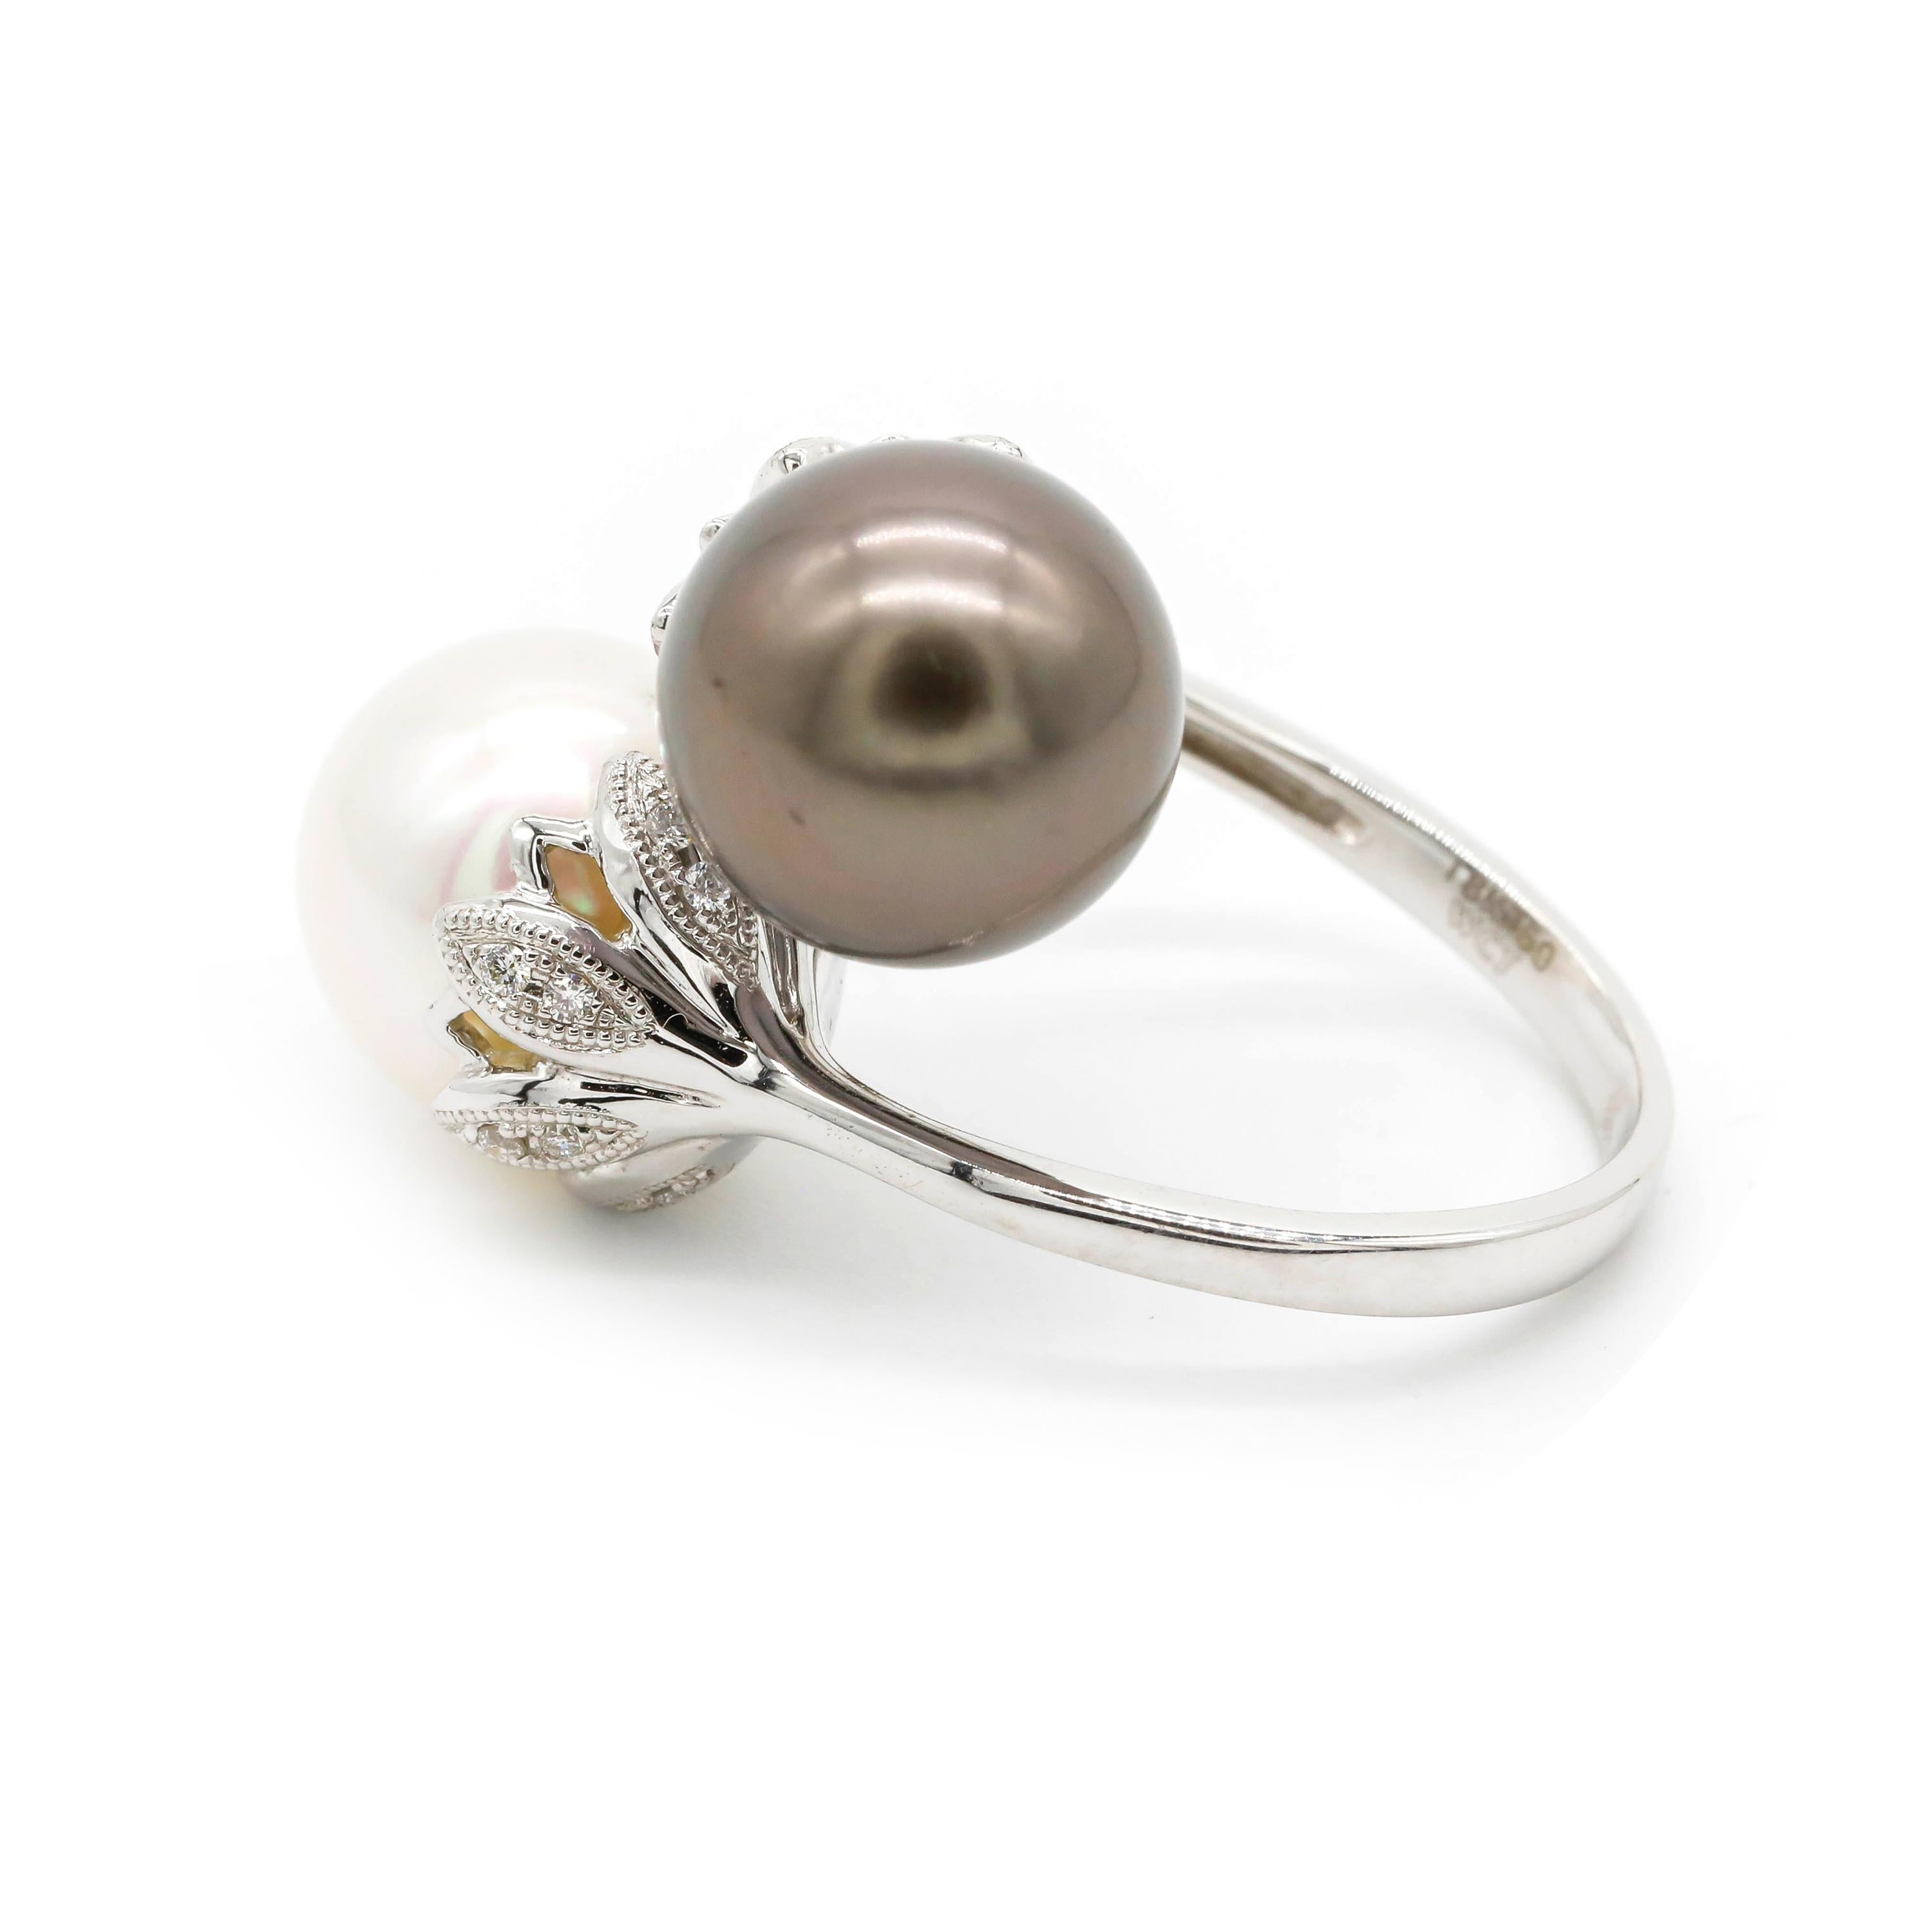 Natural Pearl 0.10 Carat Round Diamond Pave 18 Karat White Gold Wrap Ring

Natural Pearl Wrap Ring, set in stunning 18k White Gold. 0.10 CTW Round cut Diamond is Pave on the mount of the ring, embraced by Natural White Pearl in the center ,